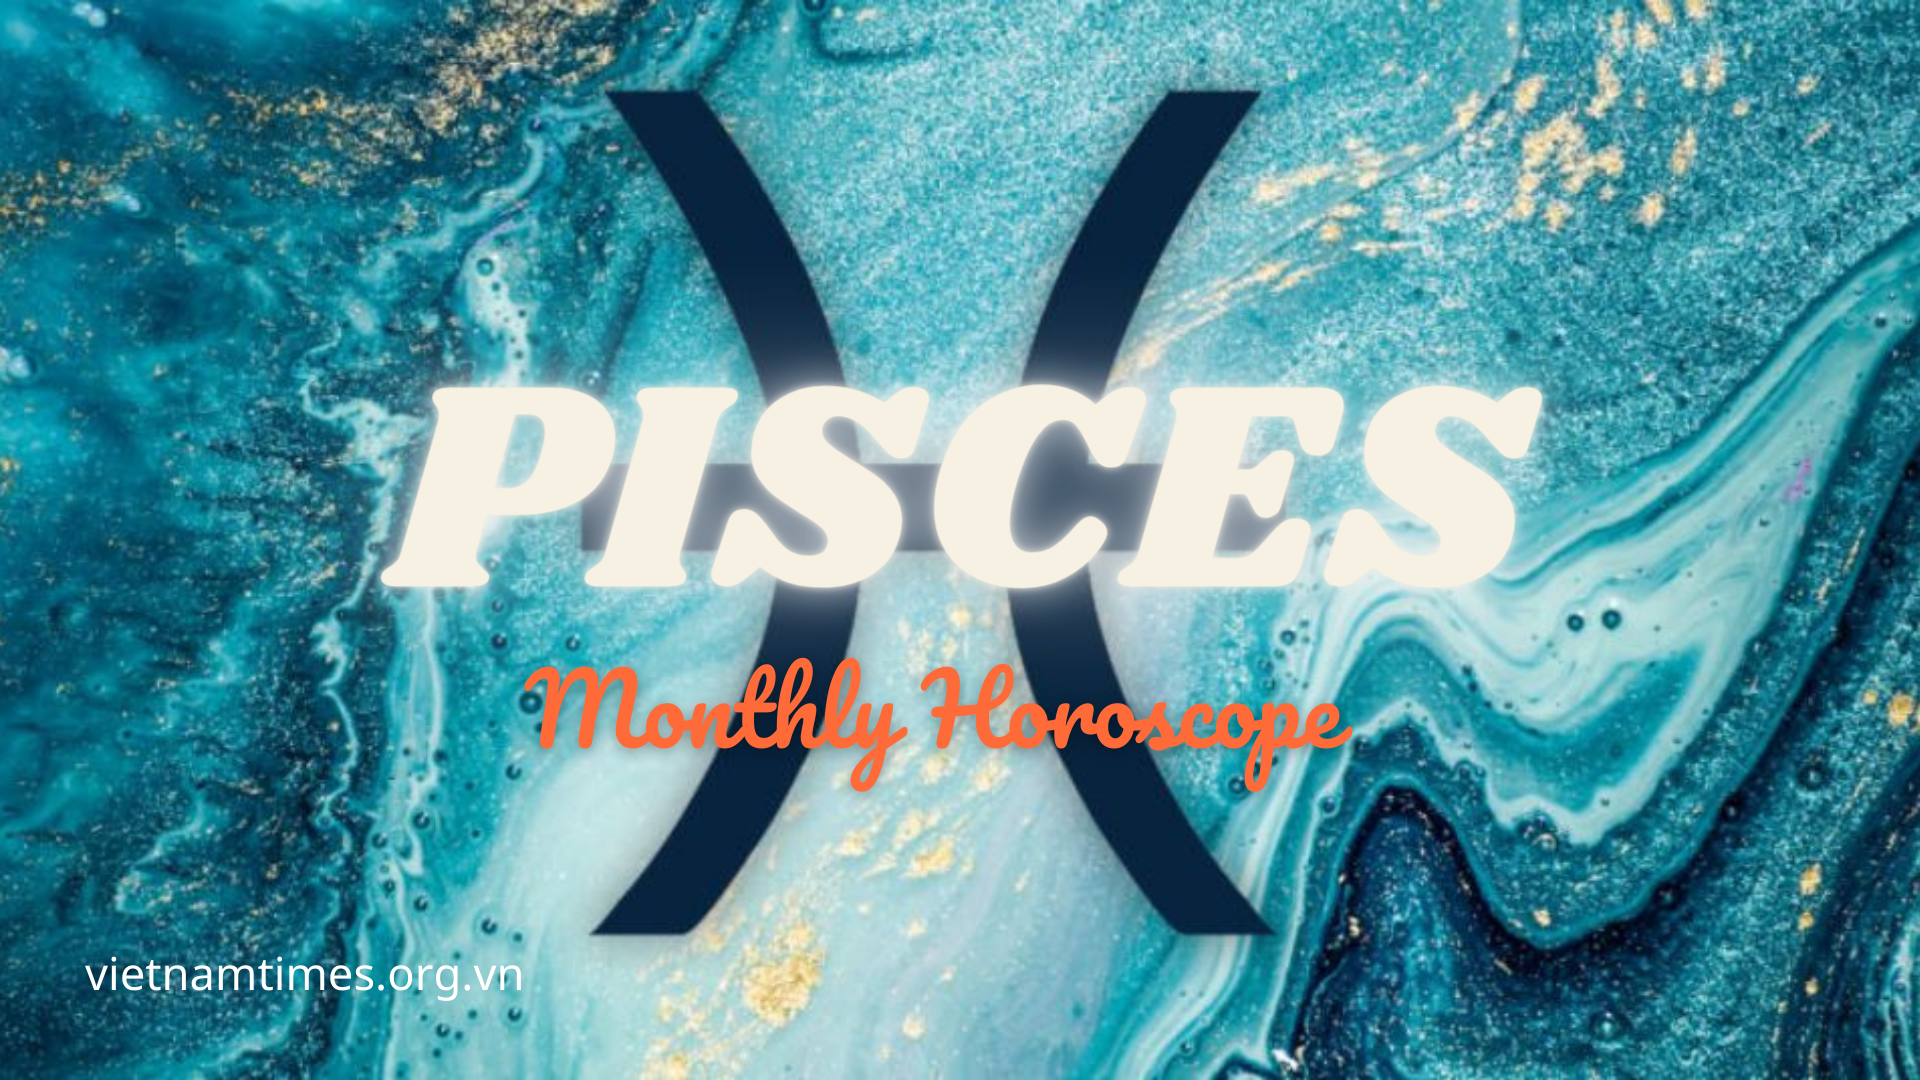 Pisces Horoscope September 2021: Monthly Predictions for Love, Financial, Career and Health